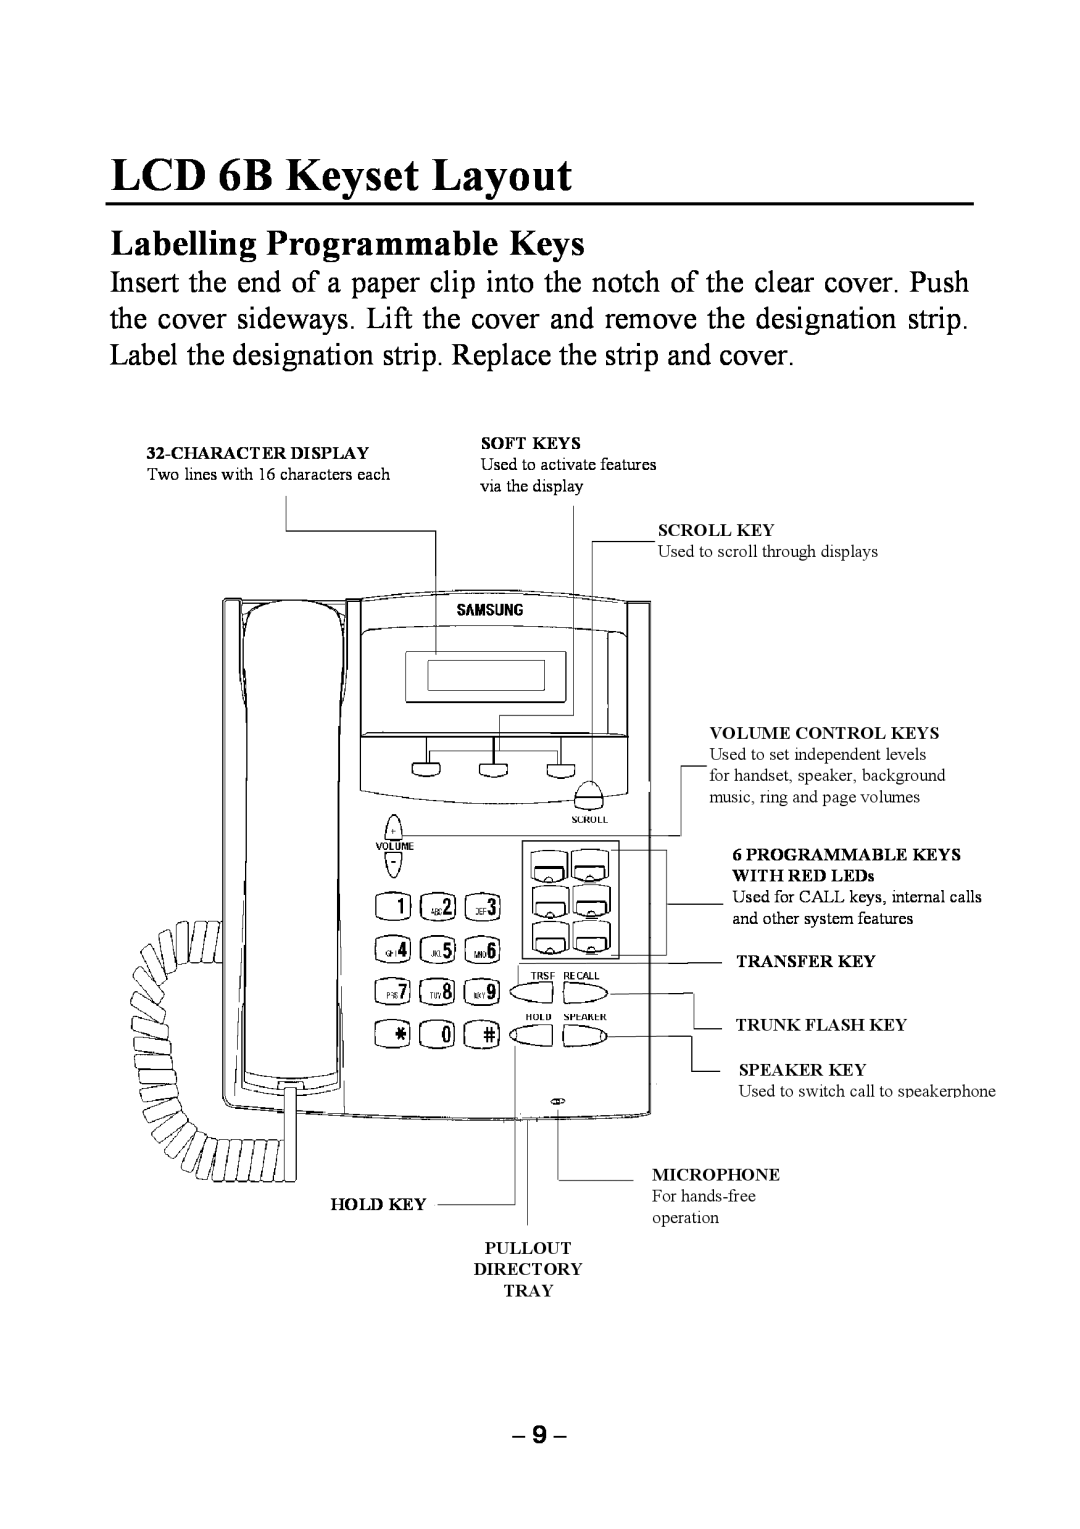 Samsung DCS KEYSET manual LCD 6B Keyset Layout, Labelling Programmable Keys, Used to activate features 